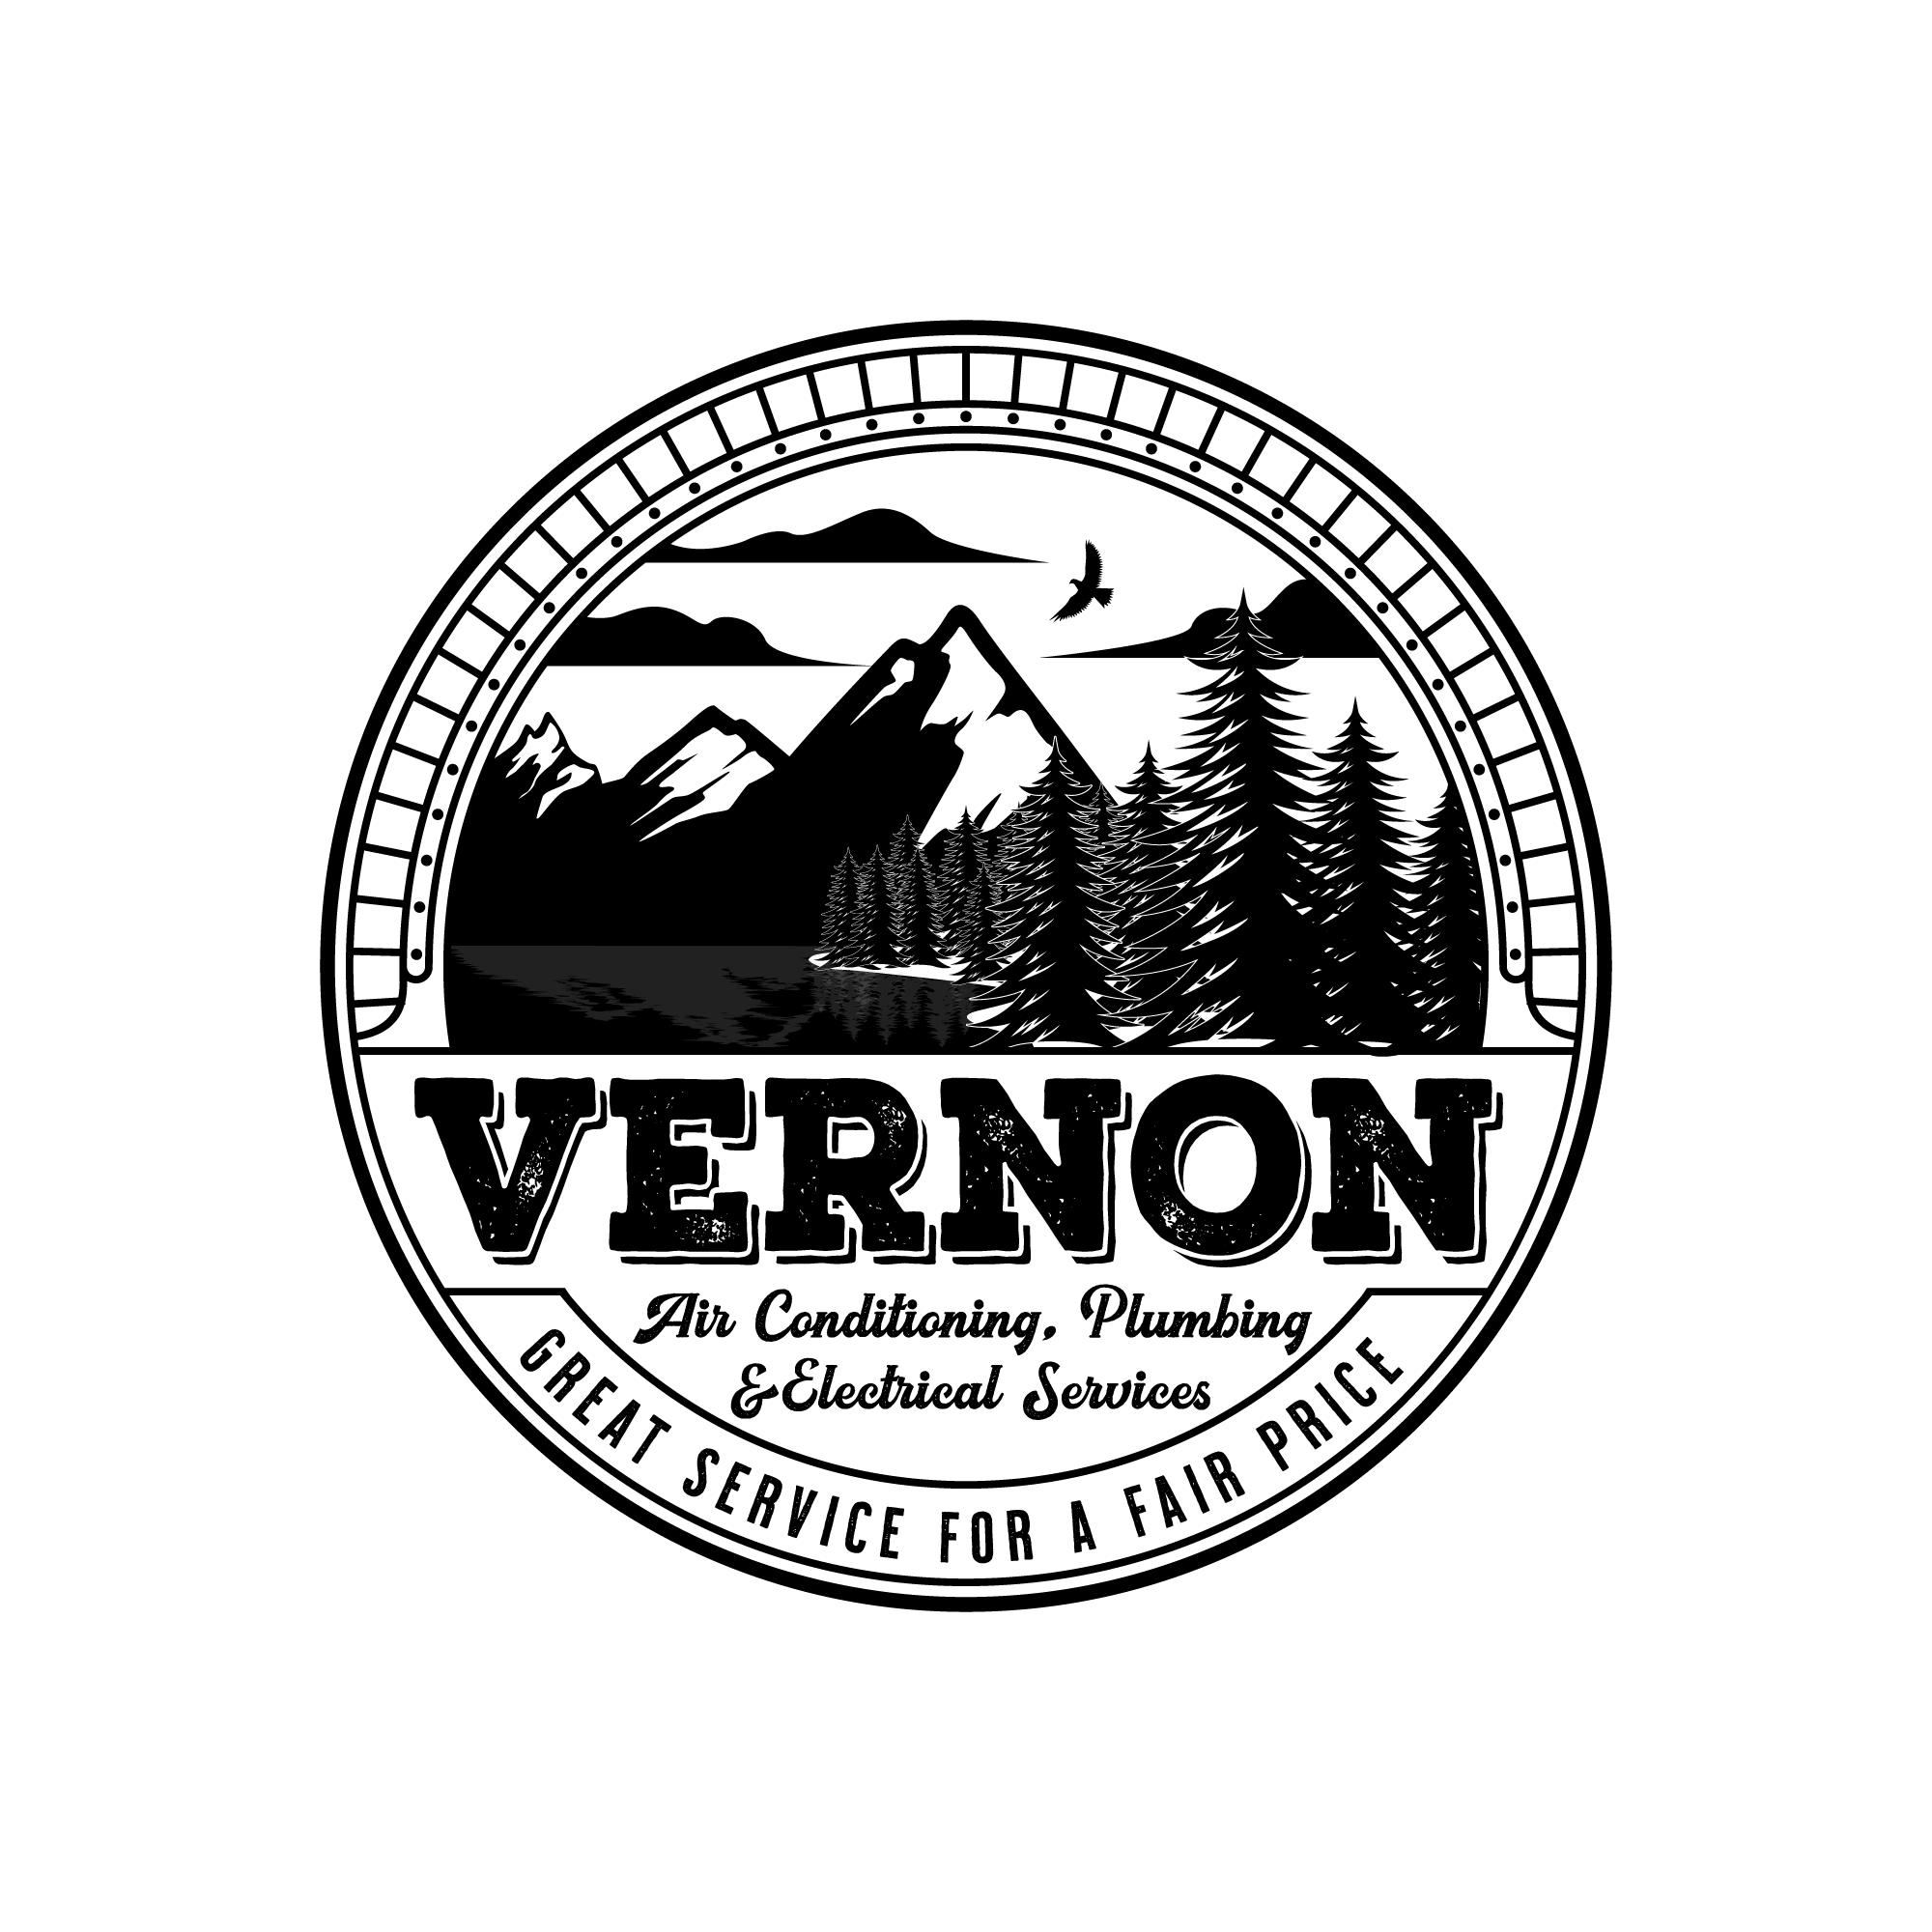 Vernon Air Conditioning, Plumbing & Electrical Services Announces Its Plumbing and HVAC Services